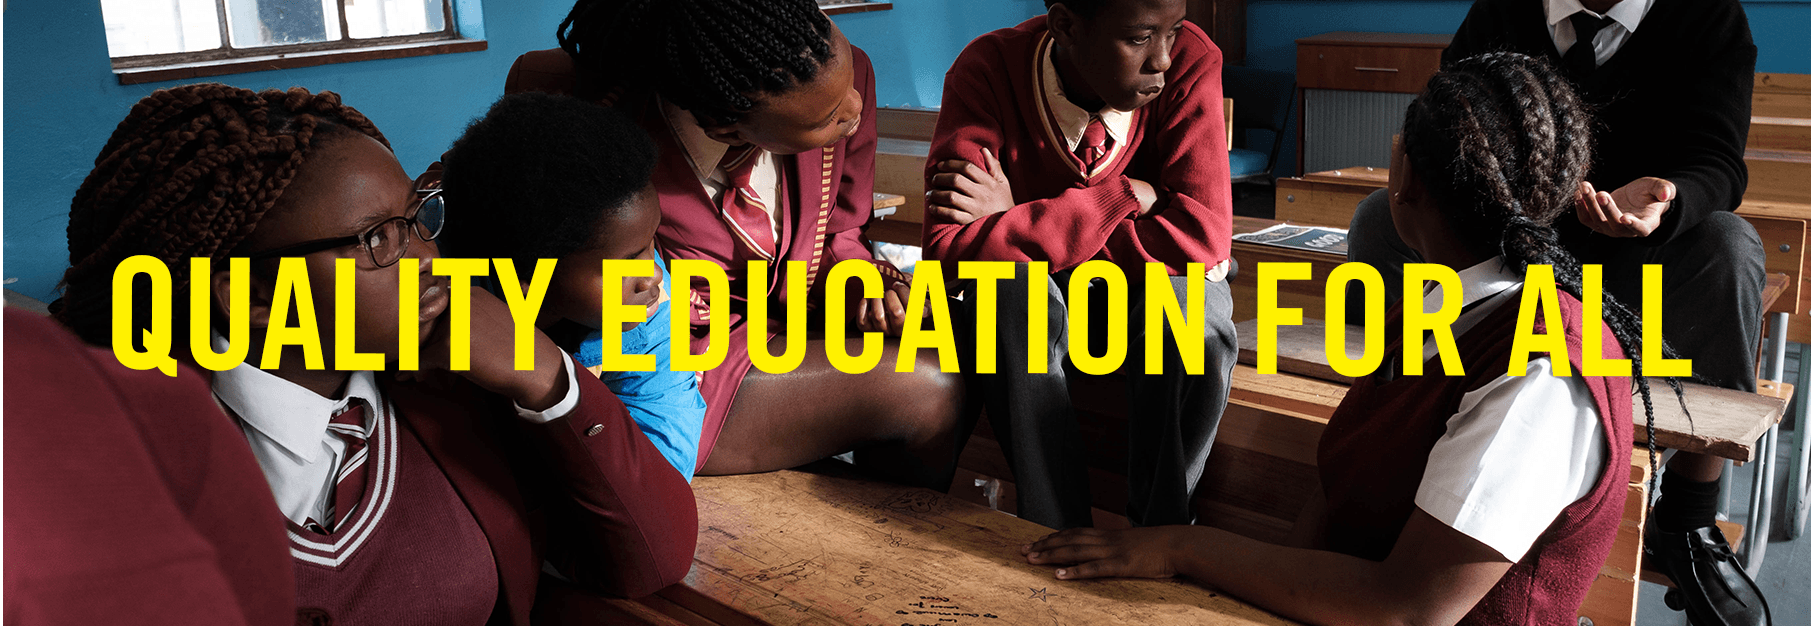 education south africa articles